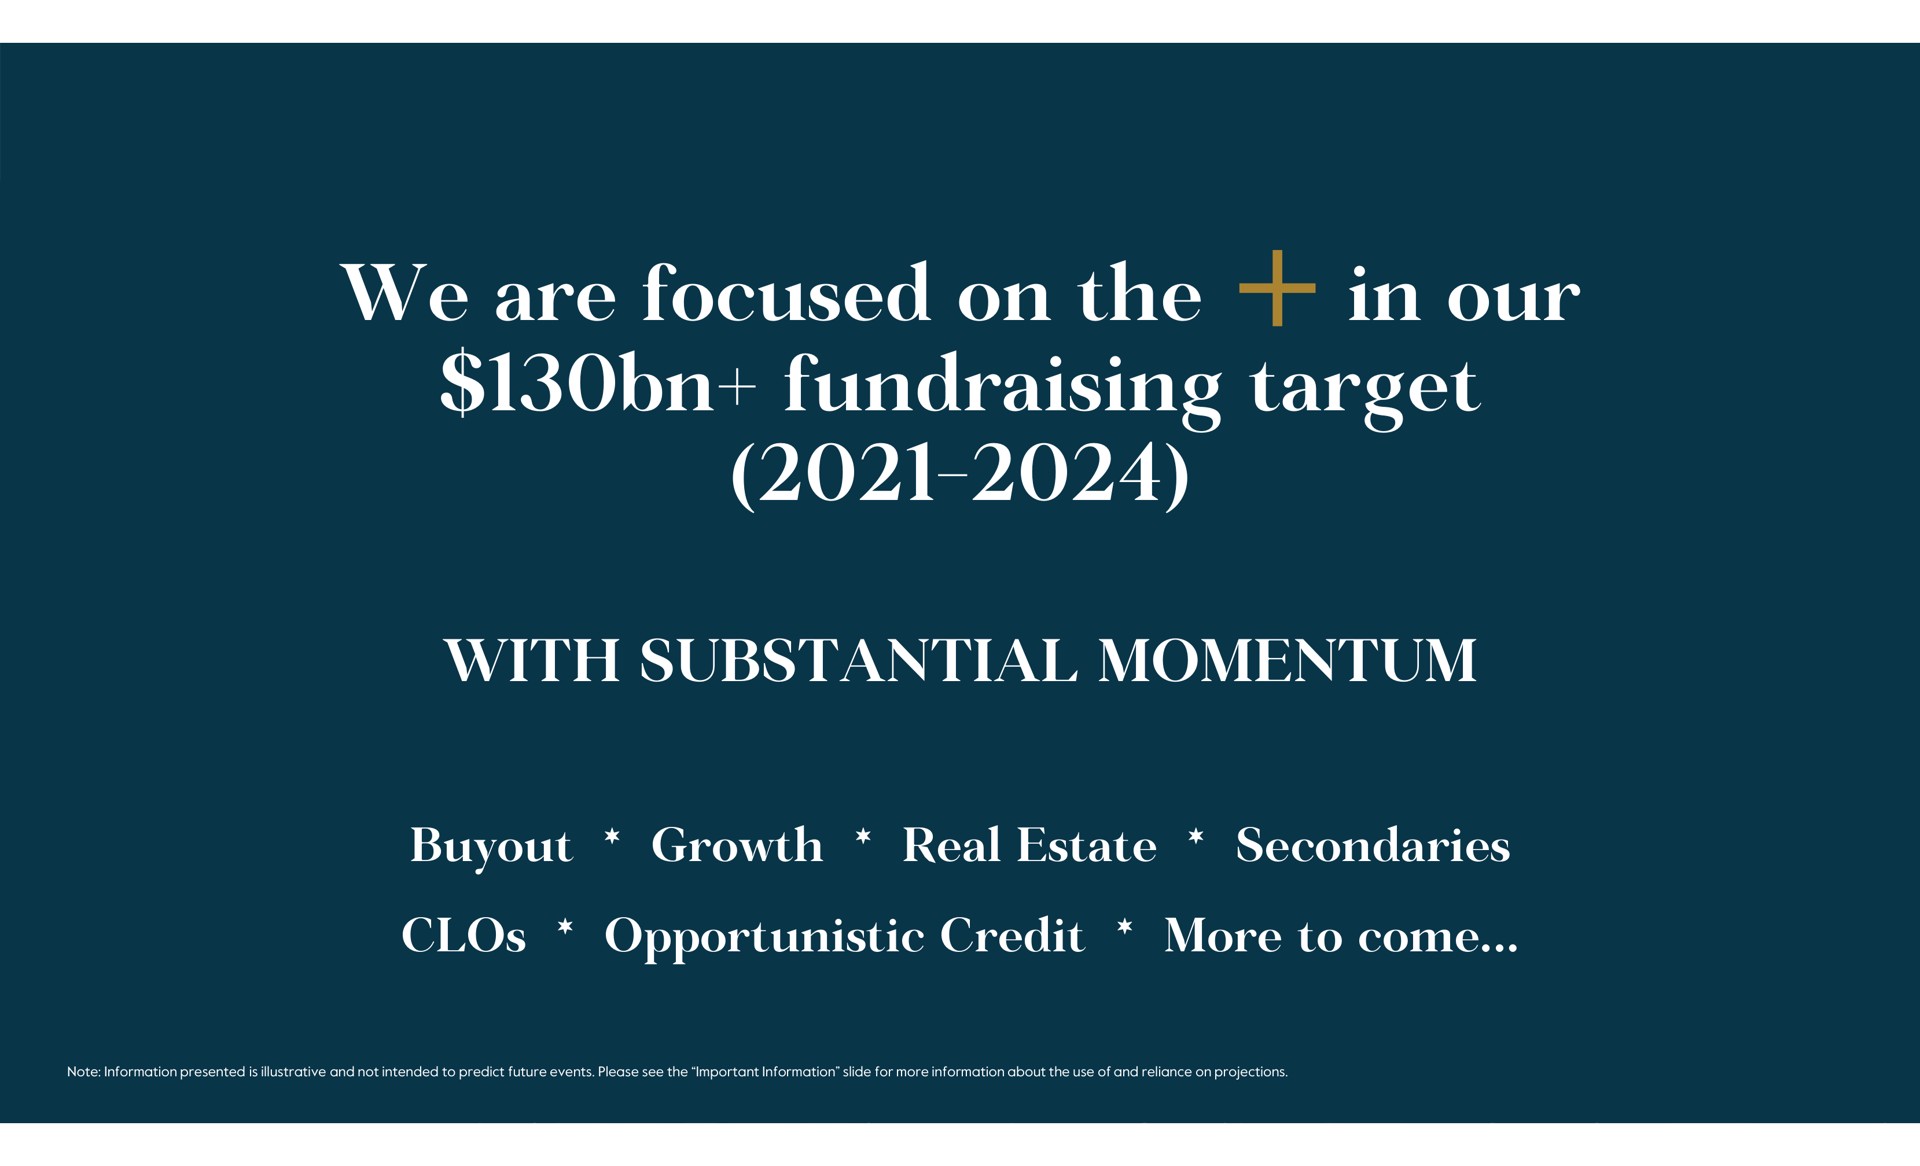 we are focused on the in our target with substantial momentum growth real estate secondaries opportunistic credit more to come | Carlyle